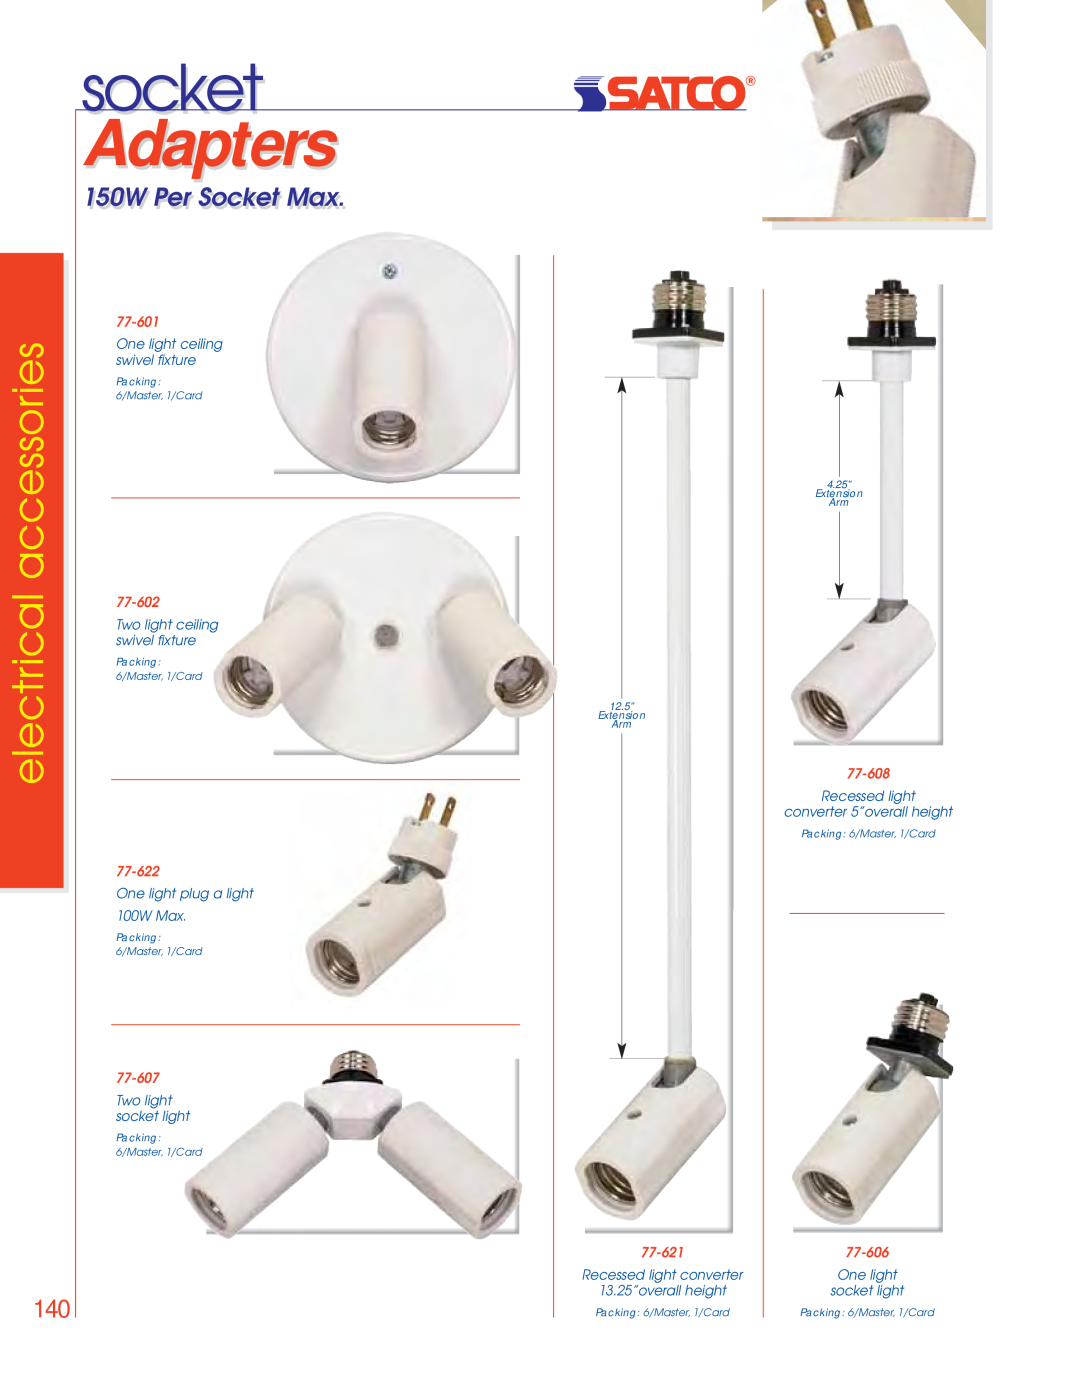 Satco Products 75-046, 76-529, 75-047 manual socket, Adapters, electrical accessories, 150W Perr Sockett Max 